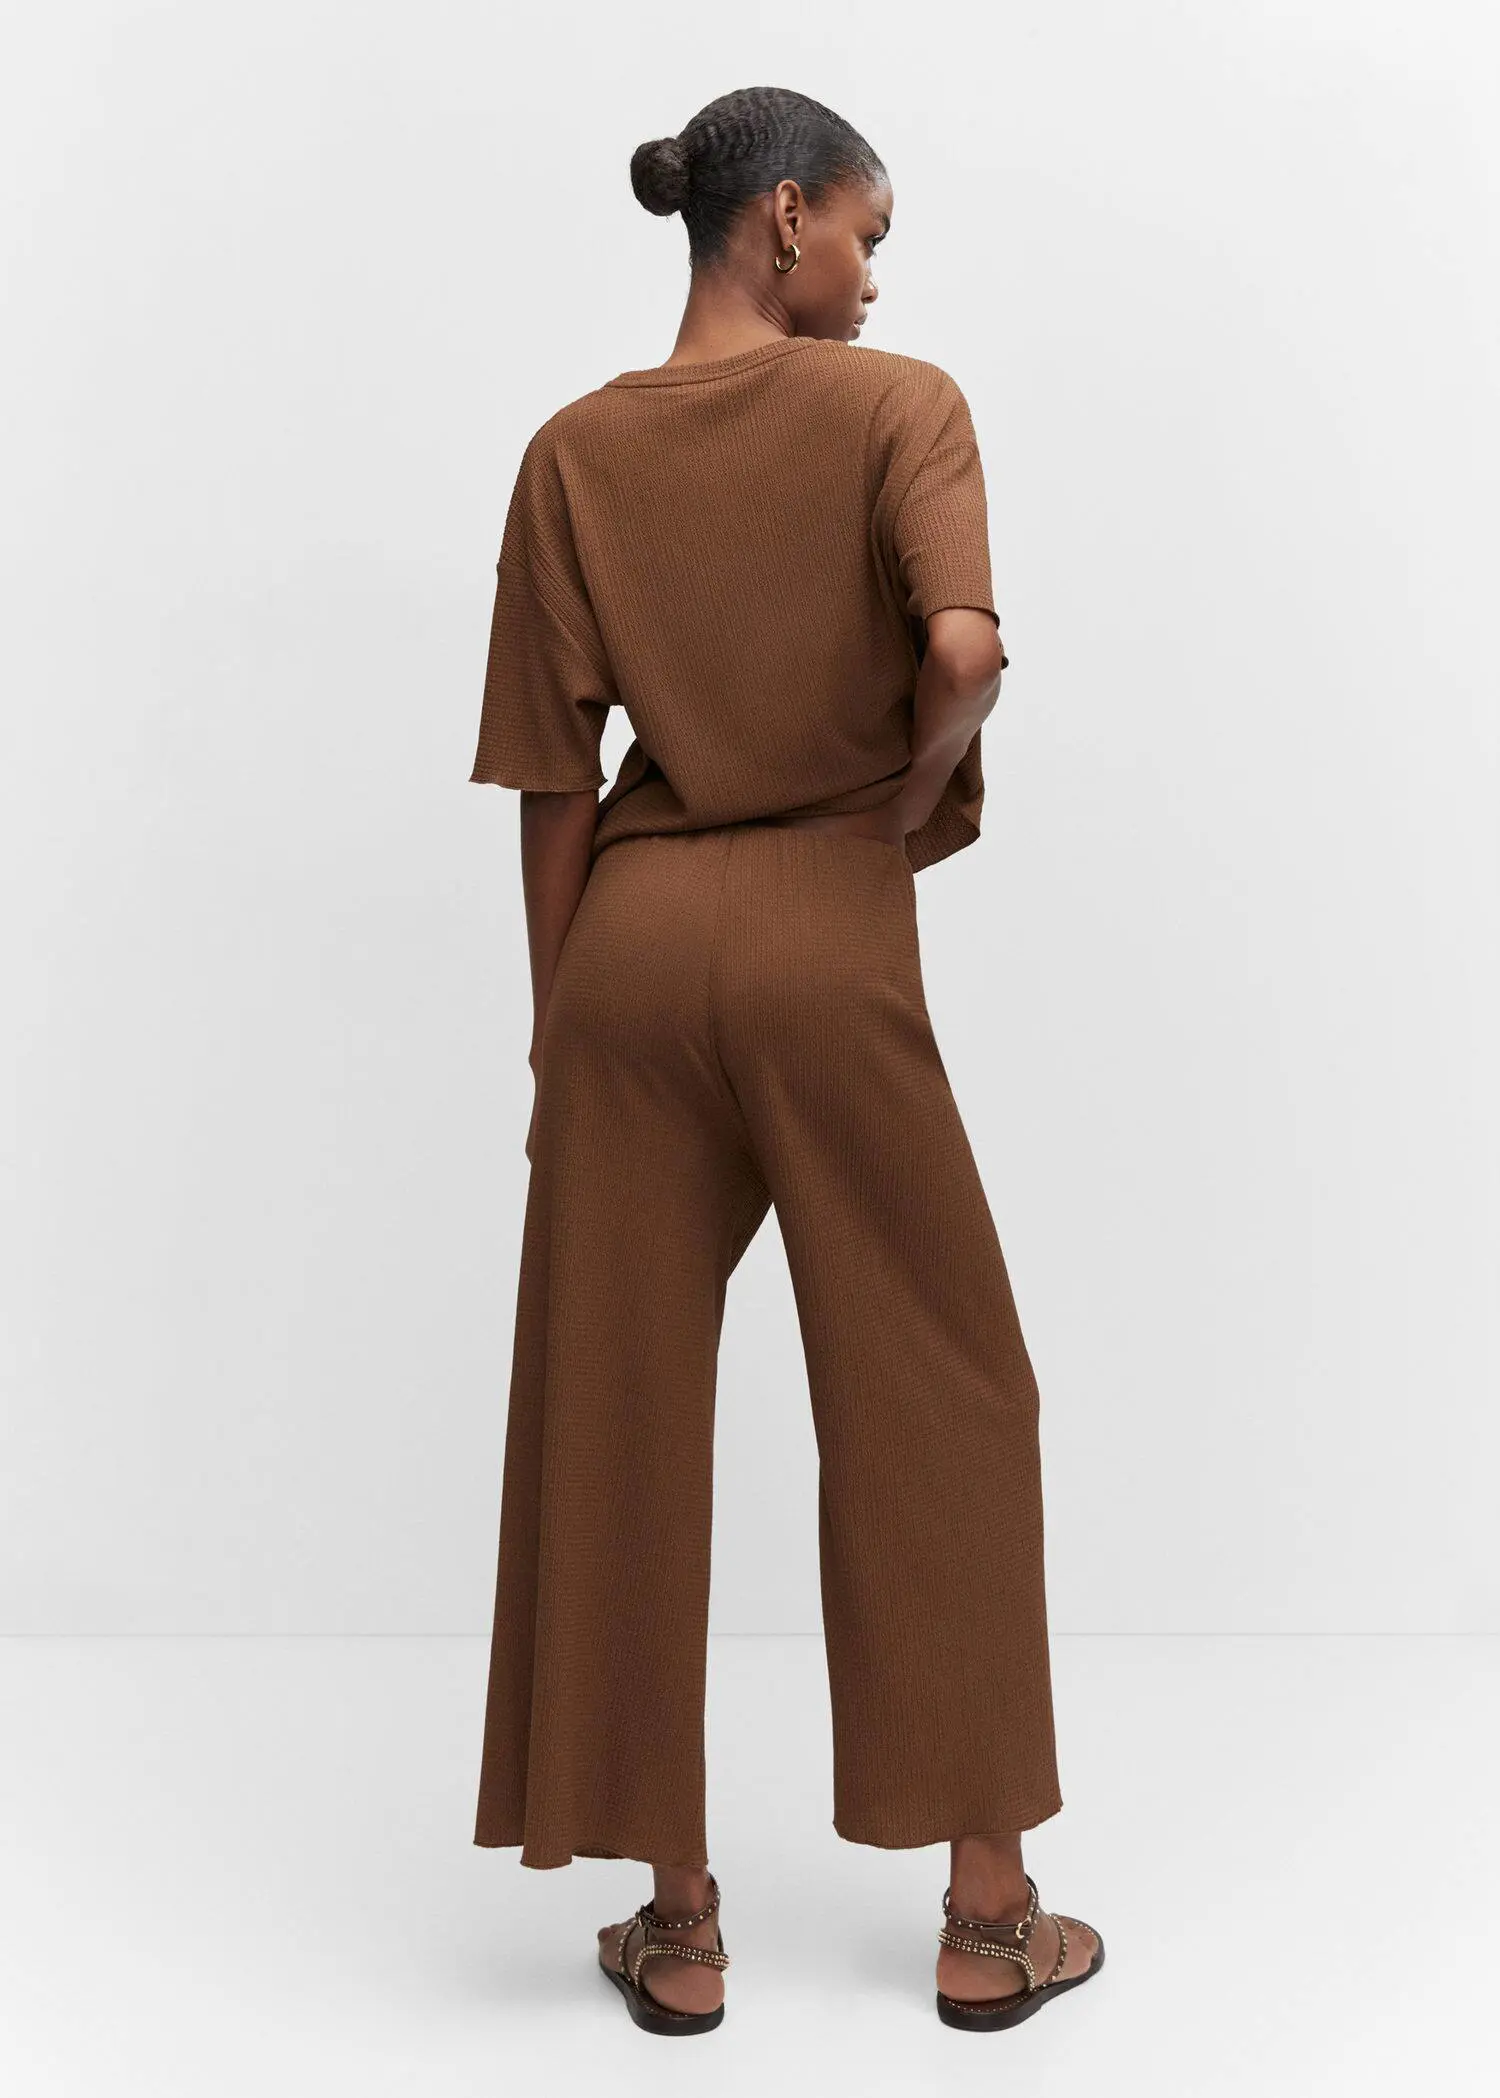 Mango Oversized textured t-shirt. a person standing in a room wearing a brown outfit. 